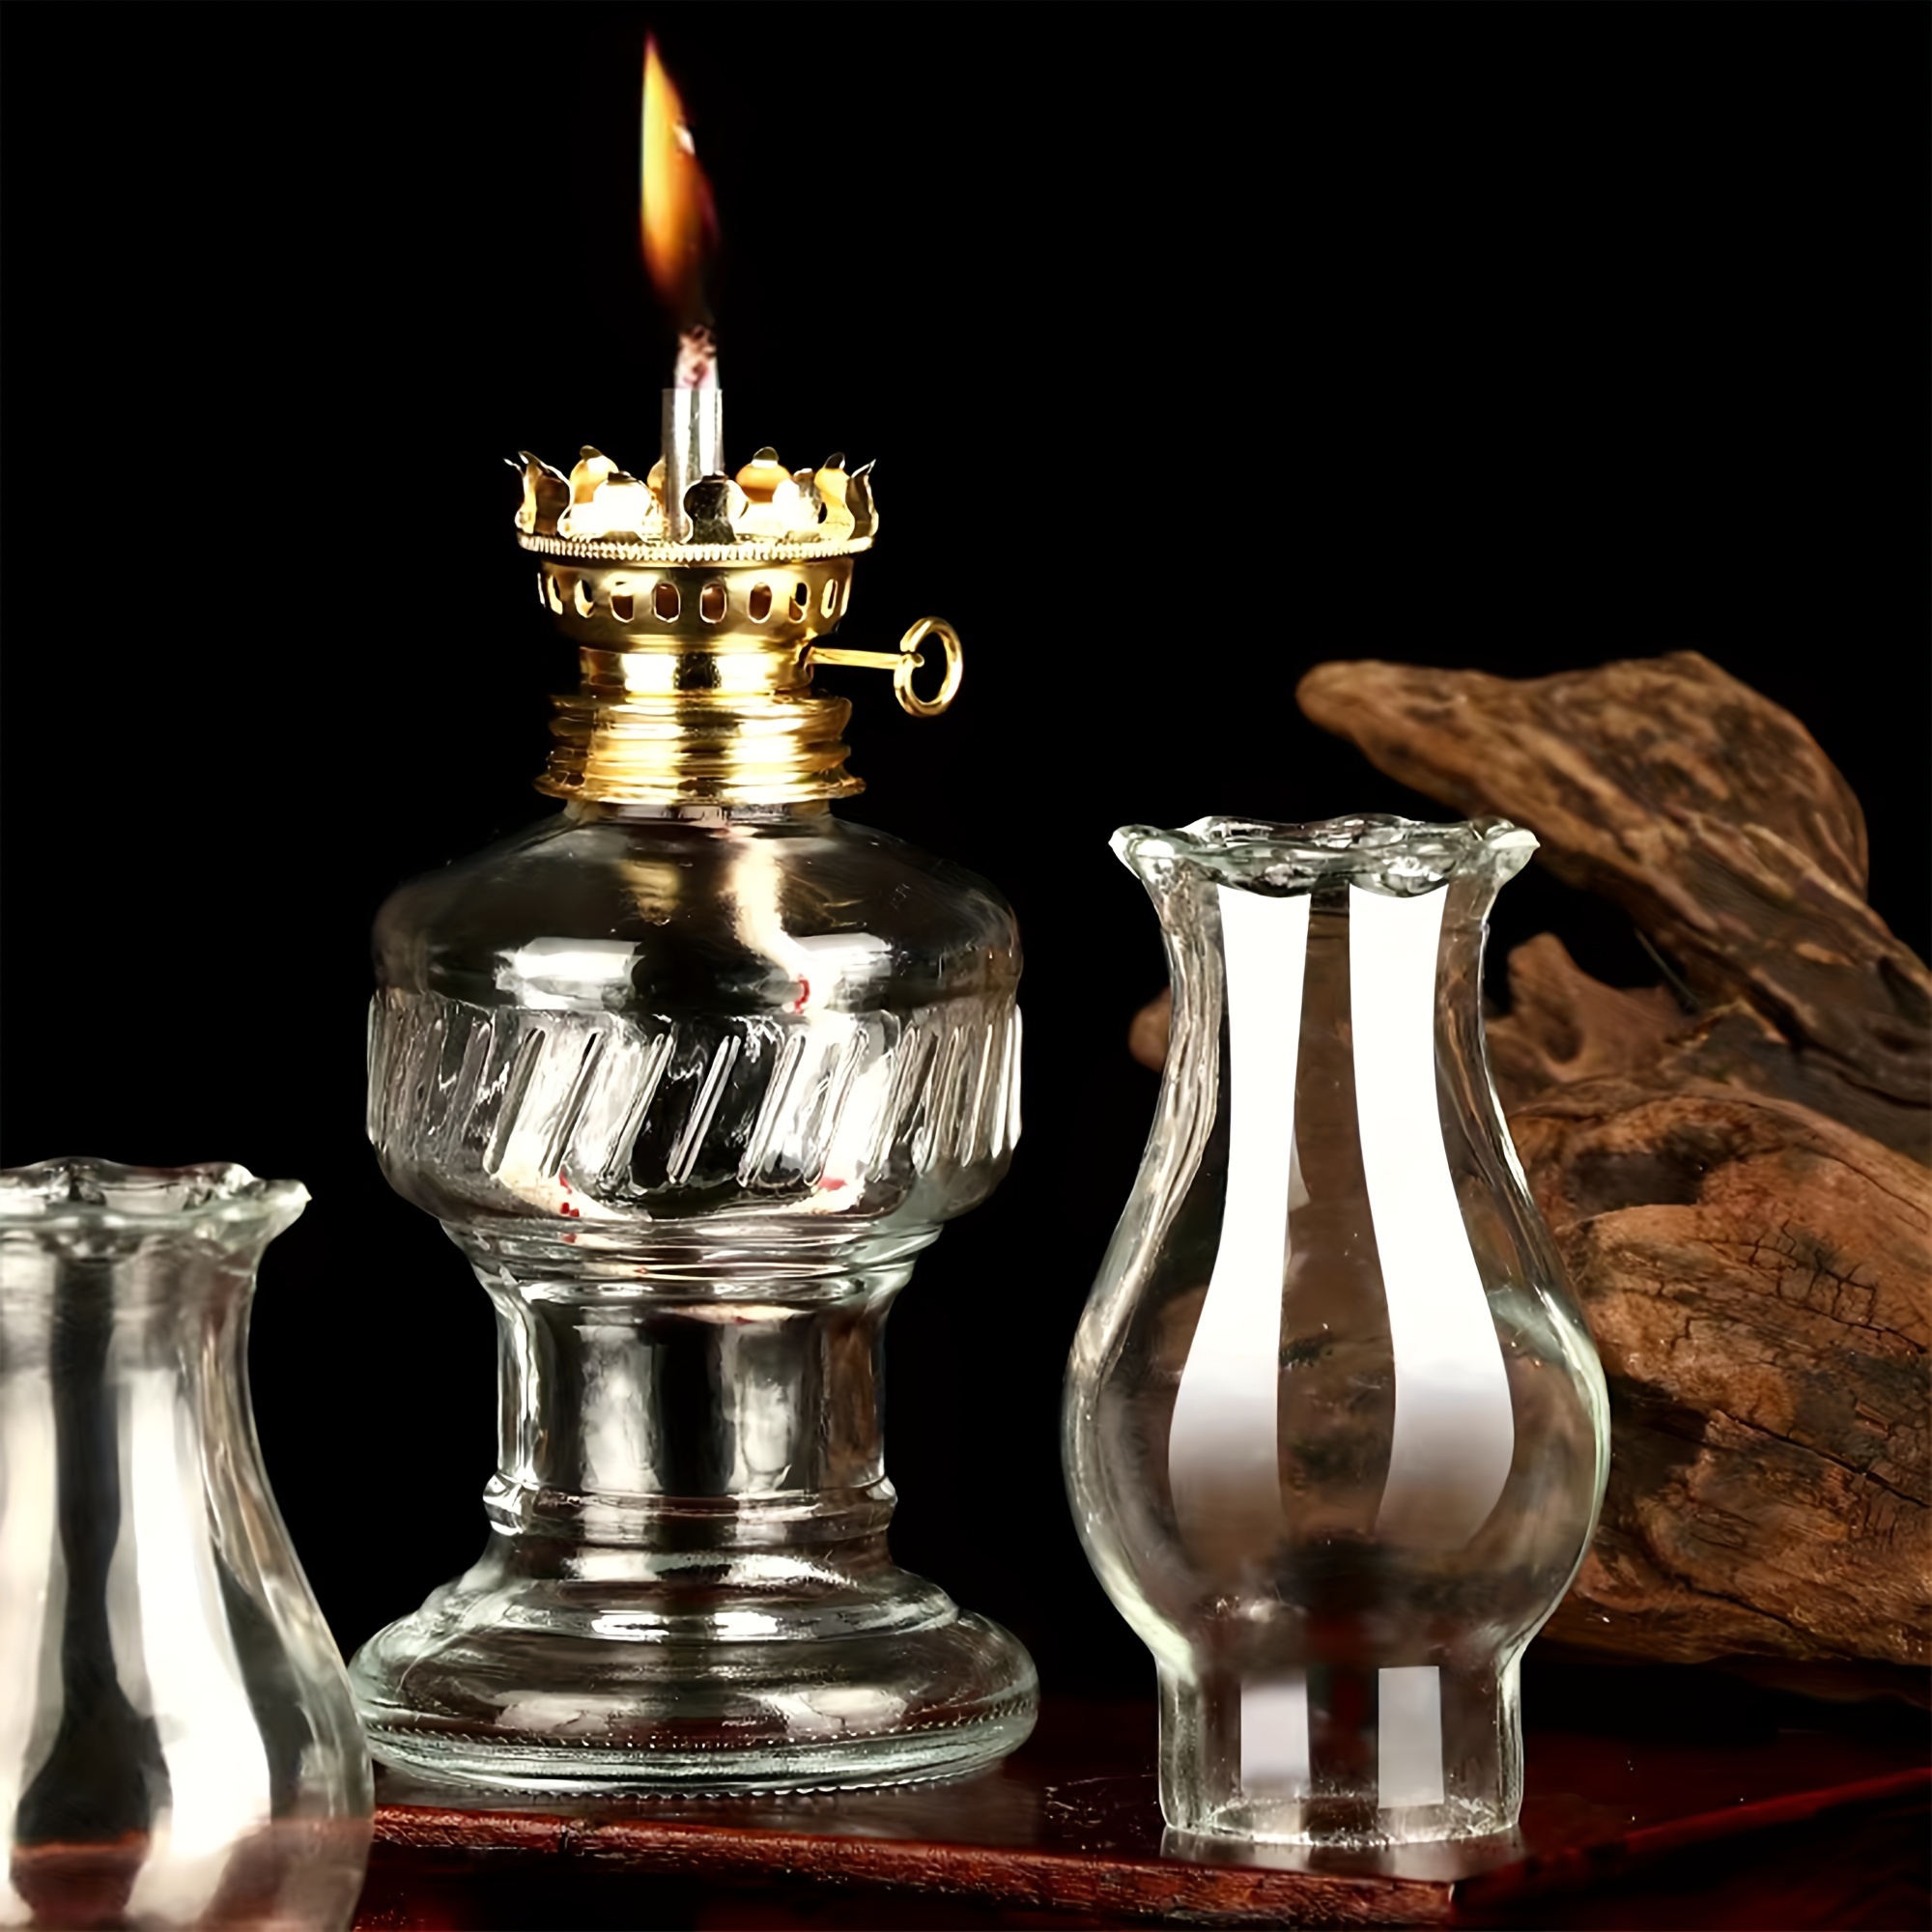 10.5 FL OZ/300ML Oil Lamps for Indoor Use With Fire Control Knob, Kerosene  Lamps / Lanterns, Hurricane Lamp With Adjustable Fire Wick 